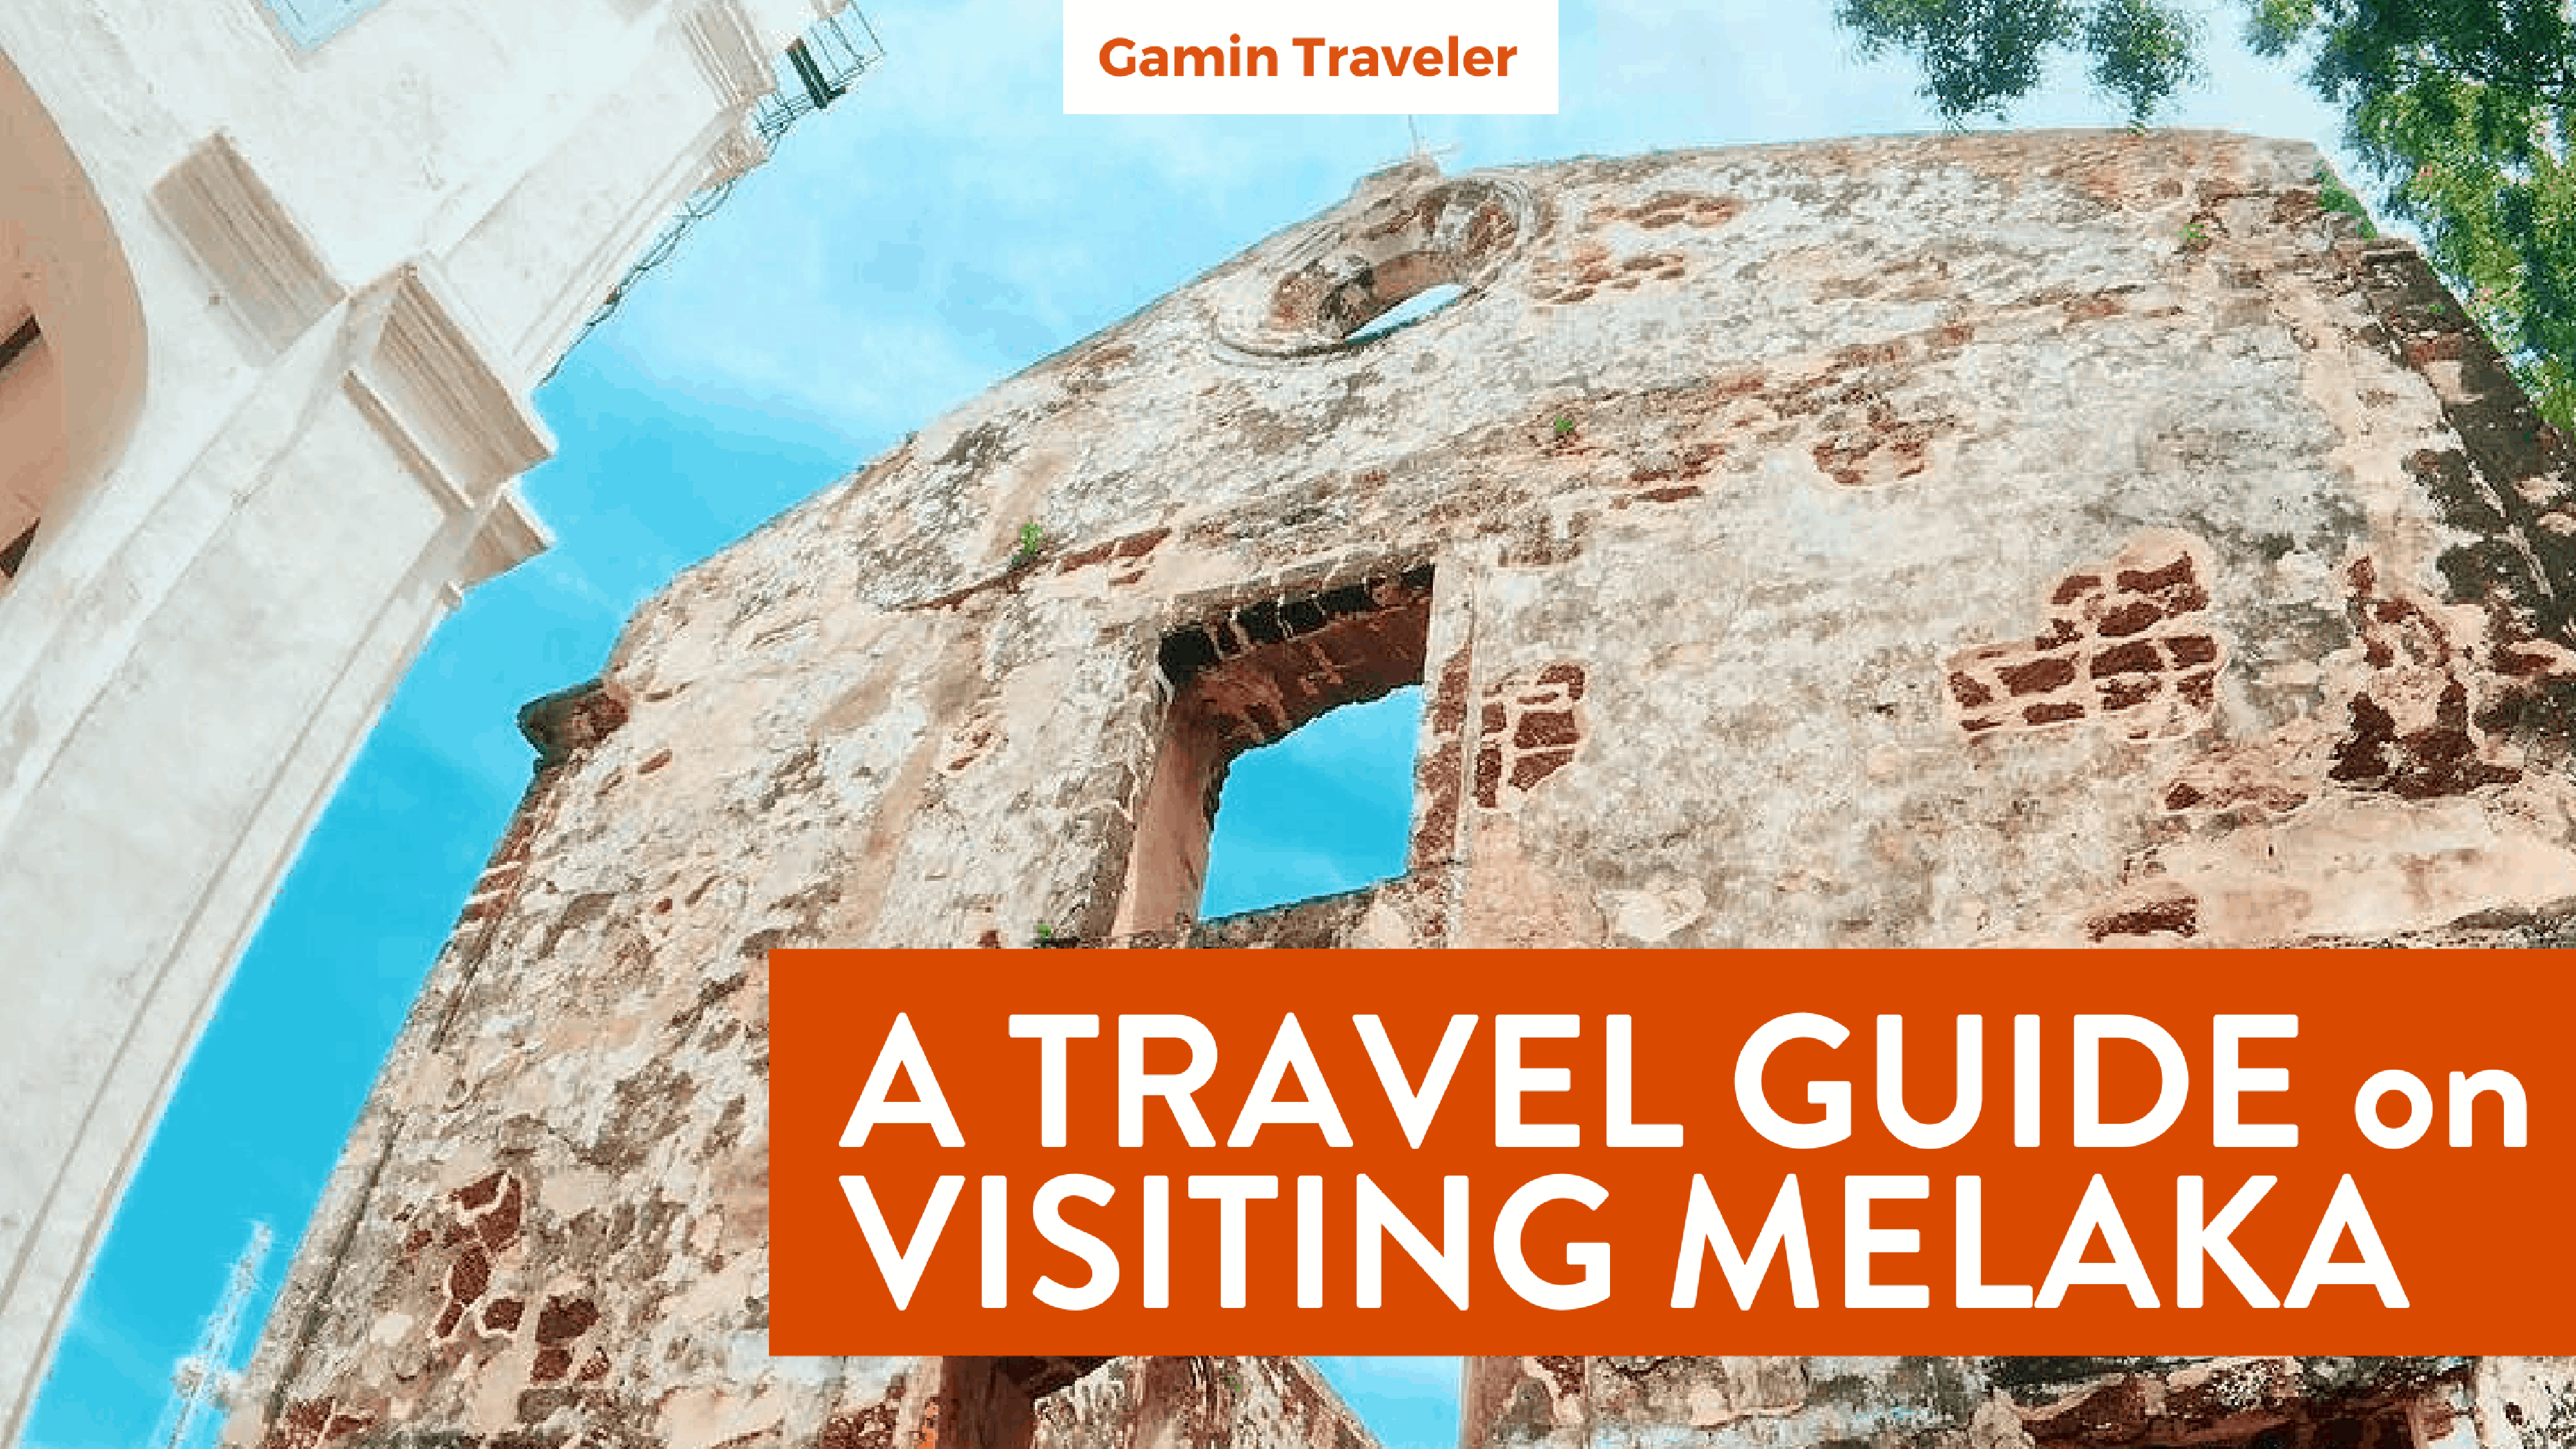 Here's a travel guide on how to visit Melaka Malaysia and its tourist spots influenced by Portuguese Colonization.